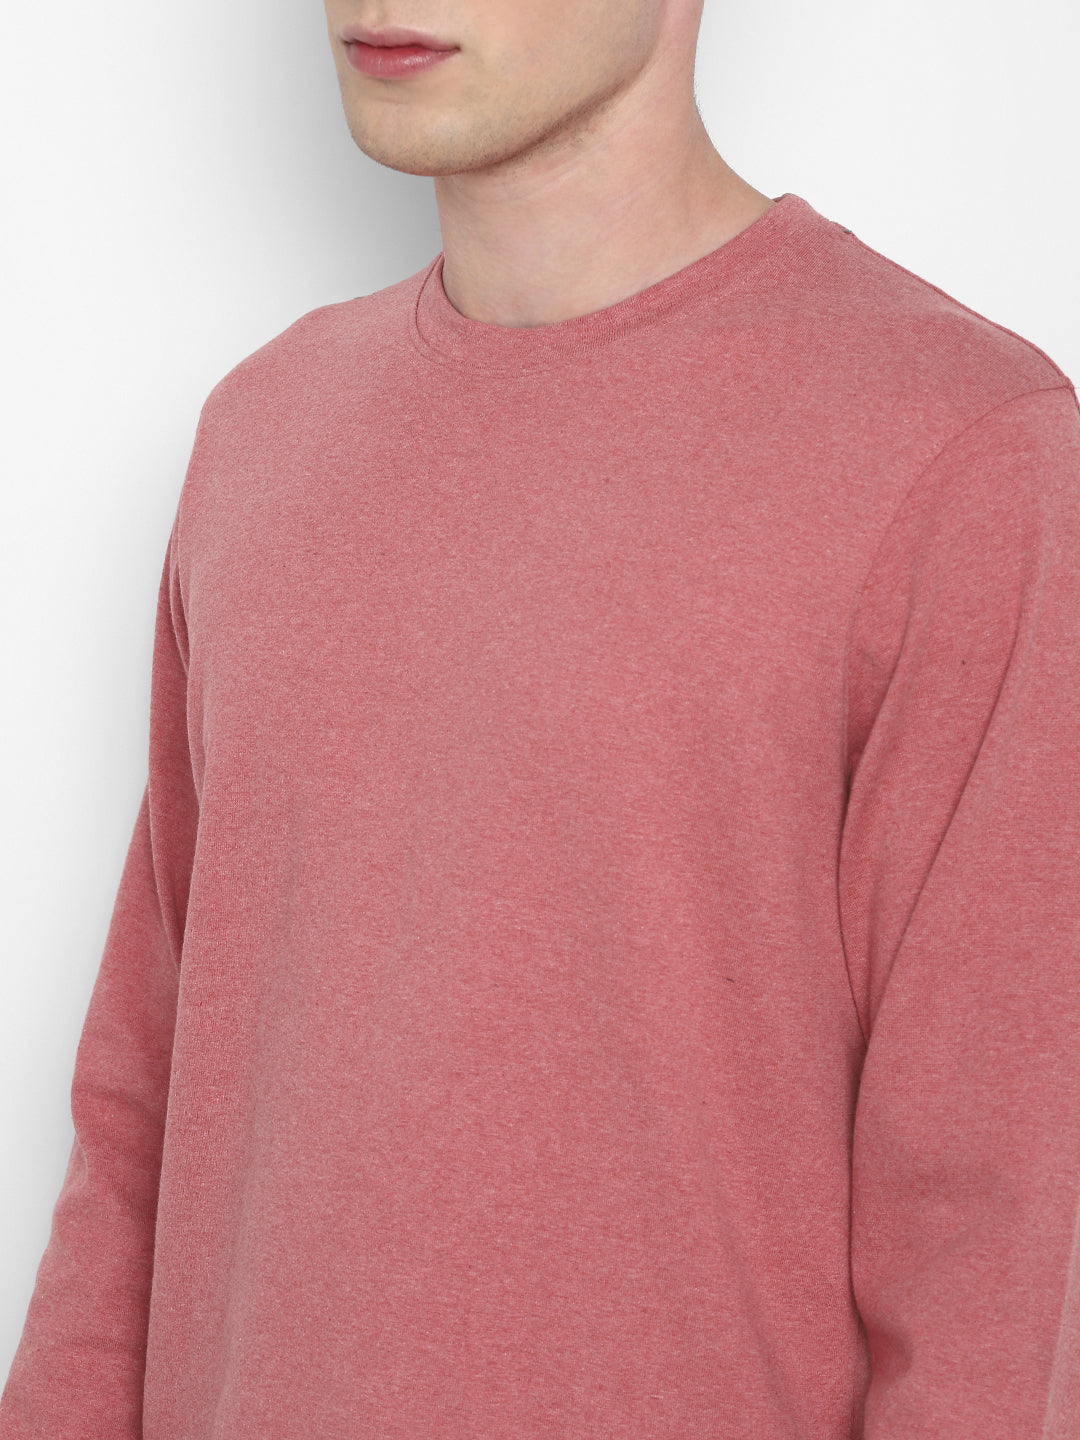 Extra Thick Winter Round Neck Cotton T-Shirt For Men - Red Melange